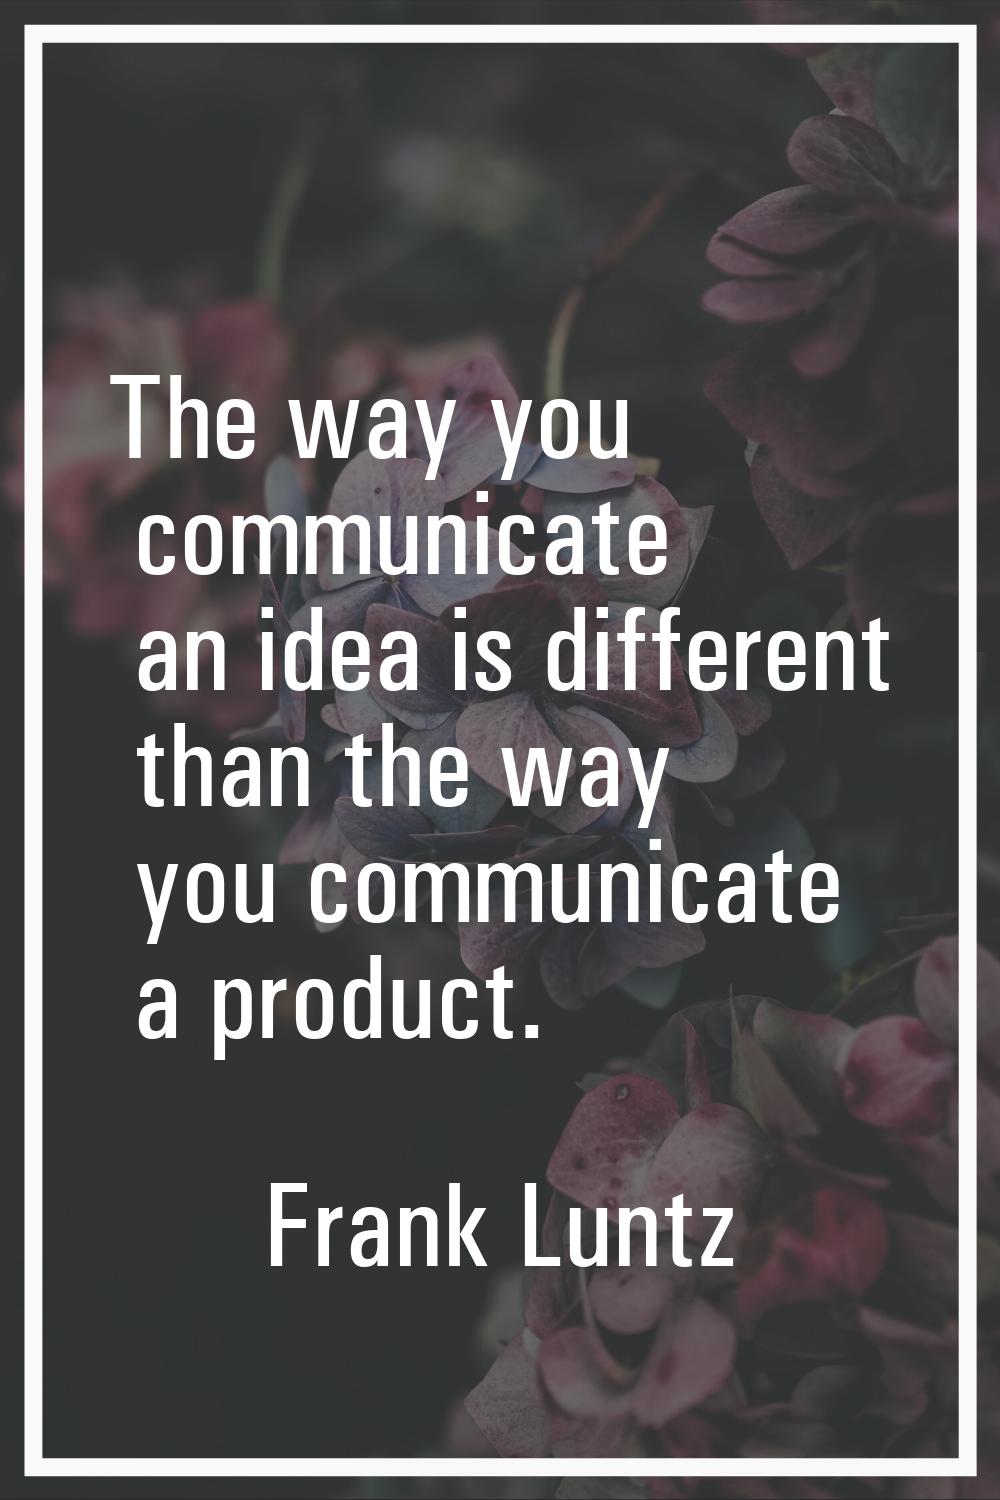 The way you communicate an idea is different than the way you communicate a product.